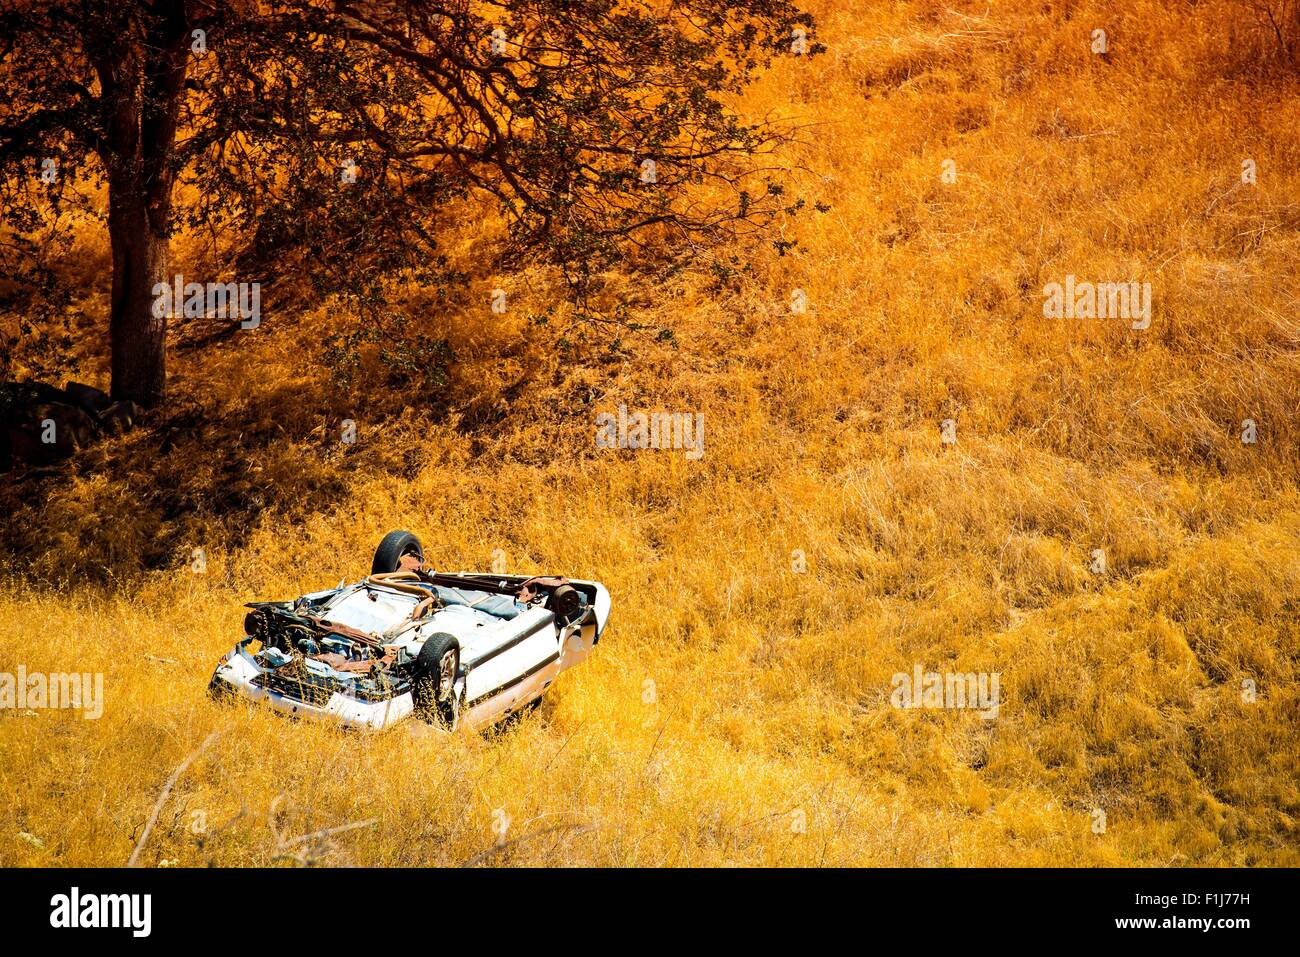 Rollover Compact Car Crash. White Crashed Car in the Mountain Road Ditch in California, USA. Traffic Accident. Stock Photo